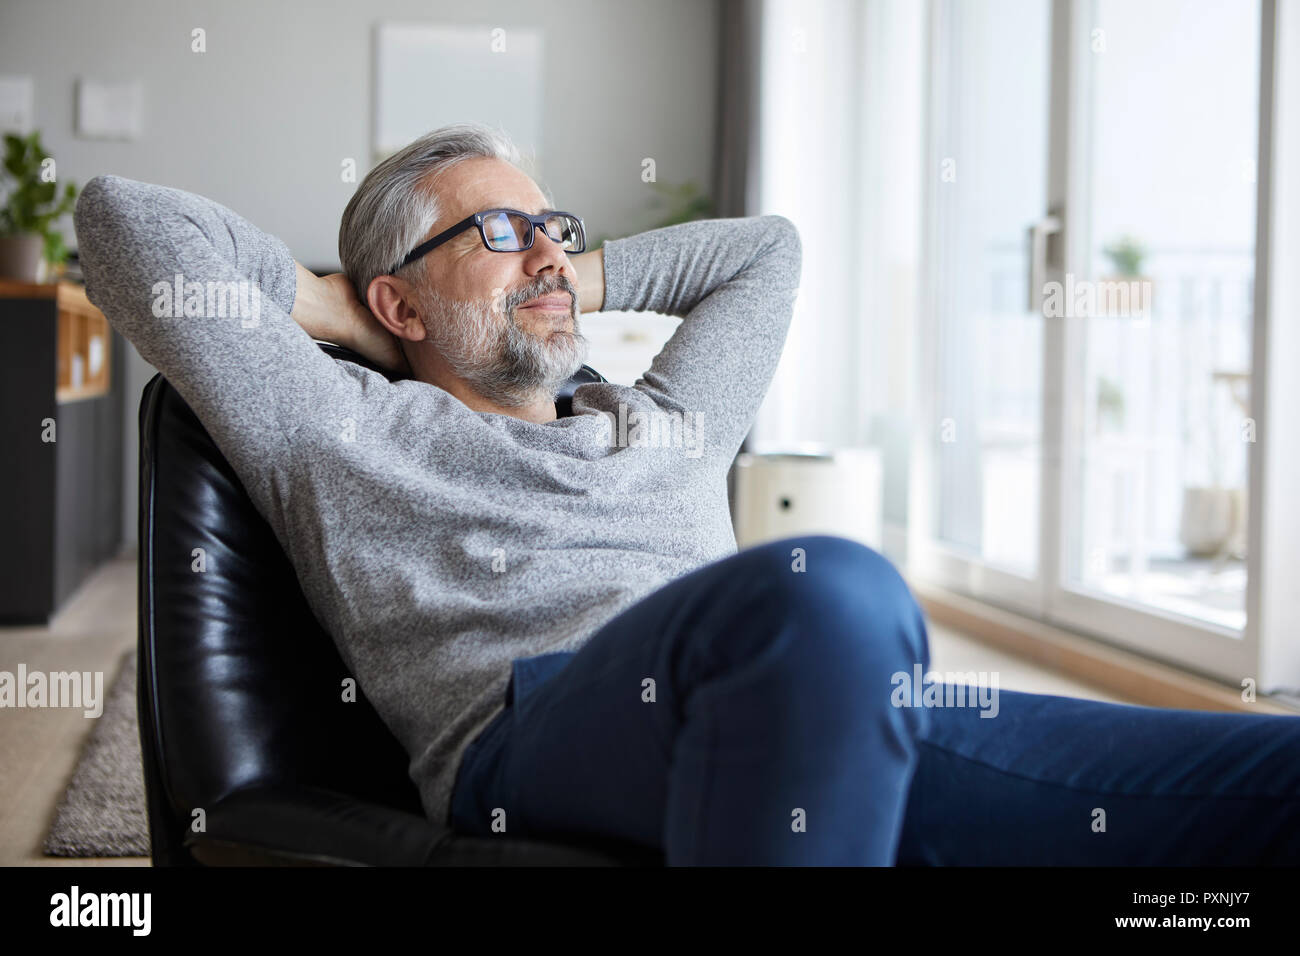 Portrait of mature man relaxing at home Banque D'Images